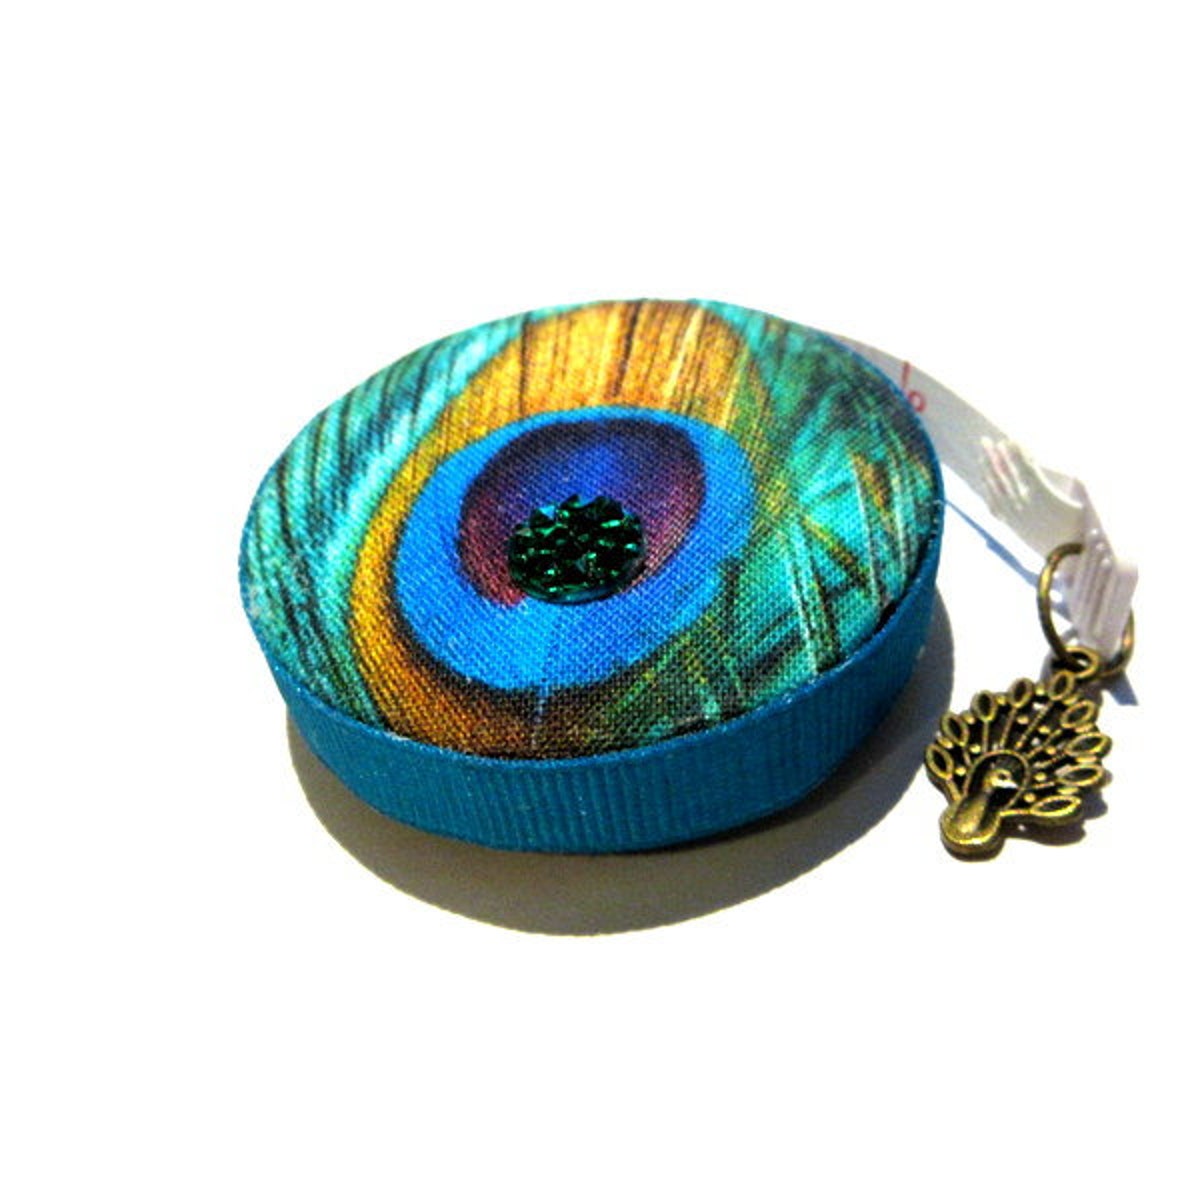 Measuring Tape Peacock Feathers Retractable Small Tape Measure